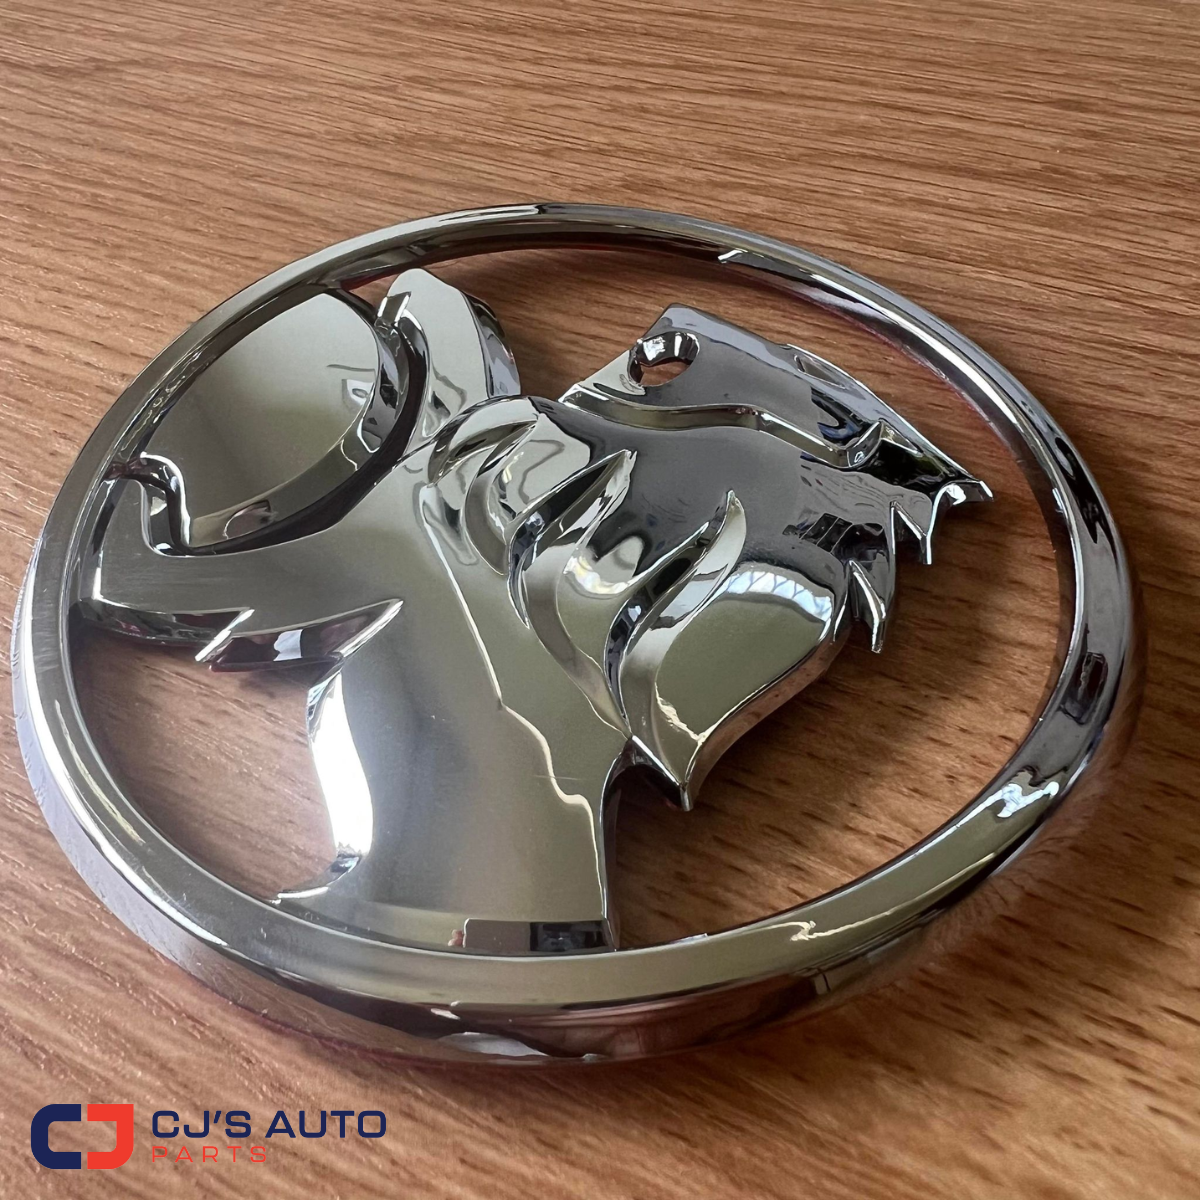 Holden Chrome Lion Badge Commodore Grille VF SV6 SS SSV Calais Berlina